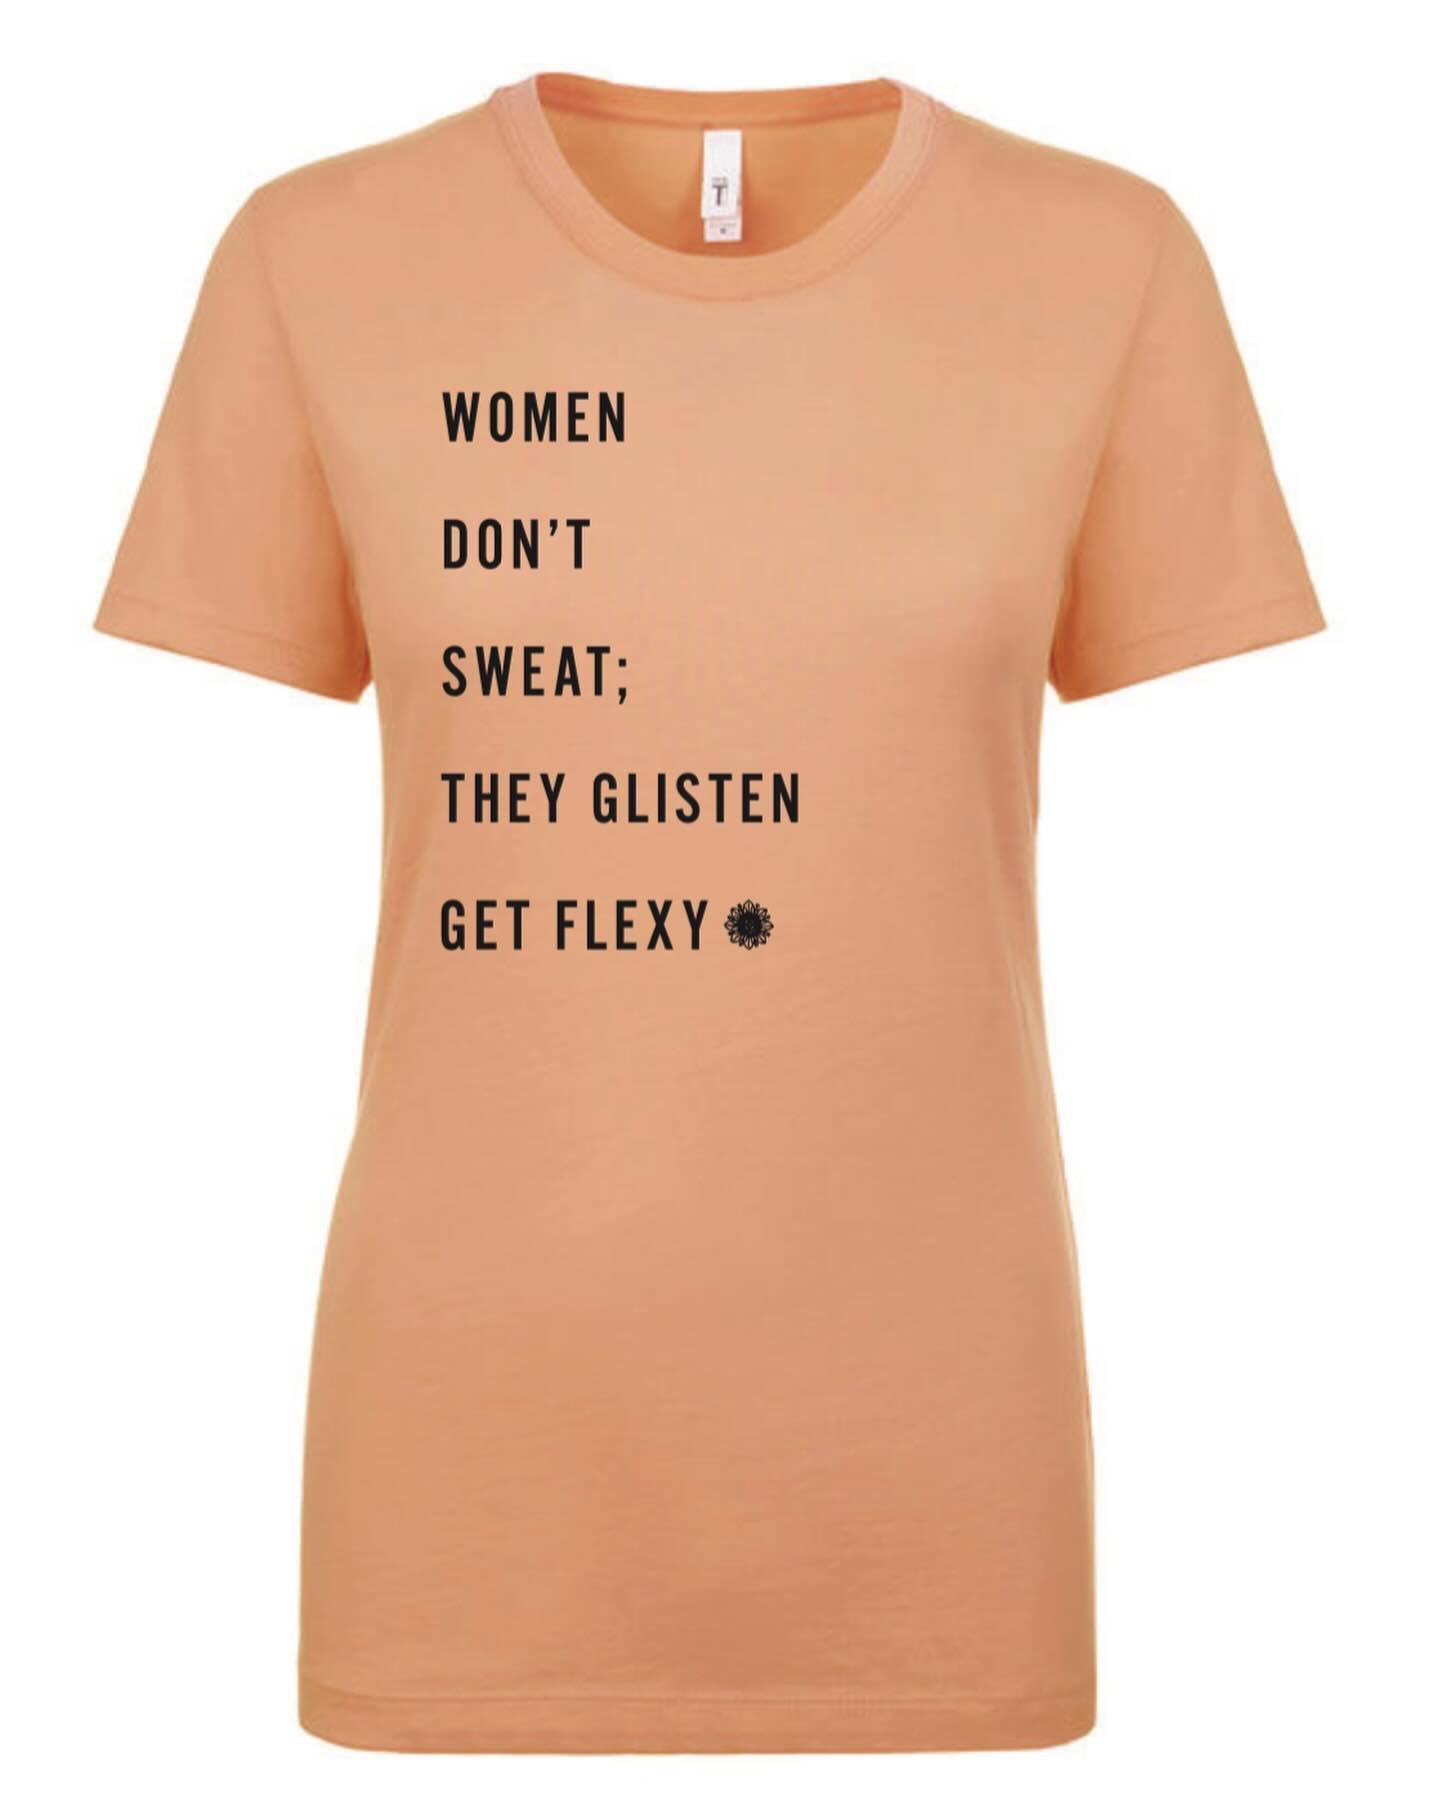 Two weeks away!!! Hard to believe that our Women&rsquo;s Wellness Retreat is nearly here. Take a peak at the T-shirt that all participants will receive for attending in their goodie tote!

Why &ldquo;Women Don&rsquo;t Sweat, They Glisten?&rdquo; That